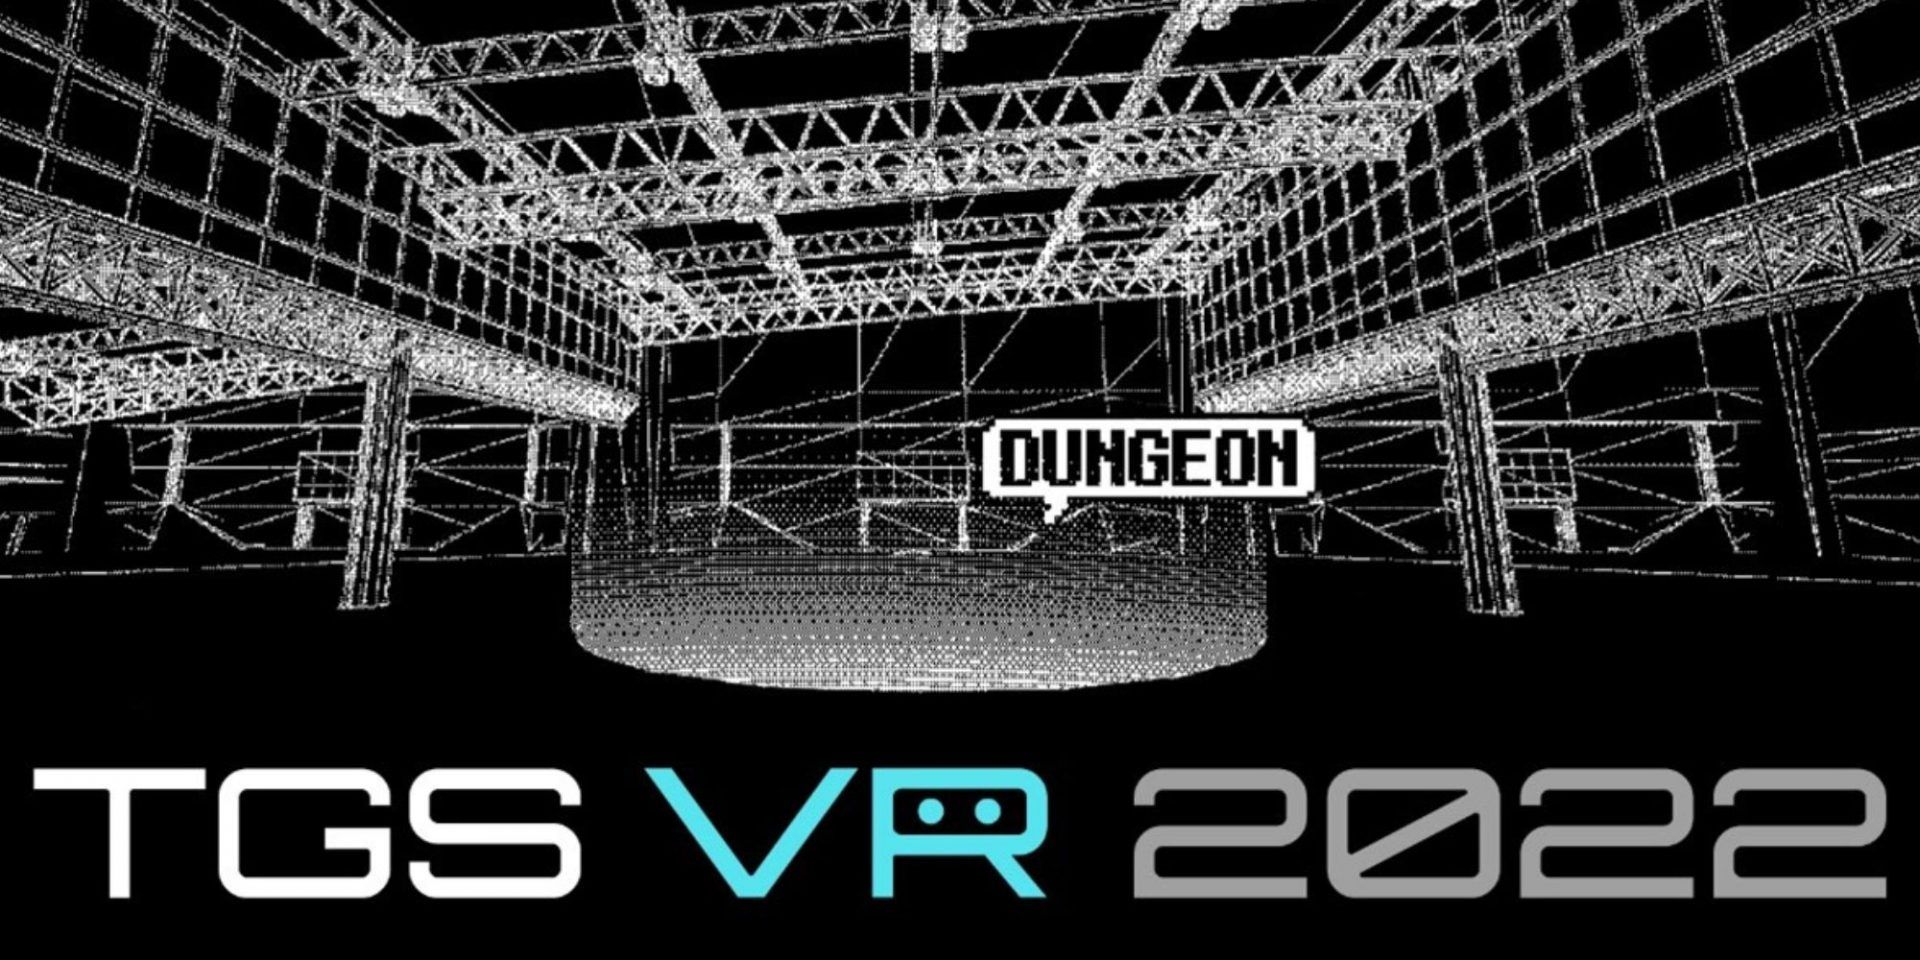 Tokyo Game Show VR 2022 Dungeon Theme